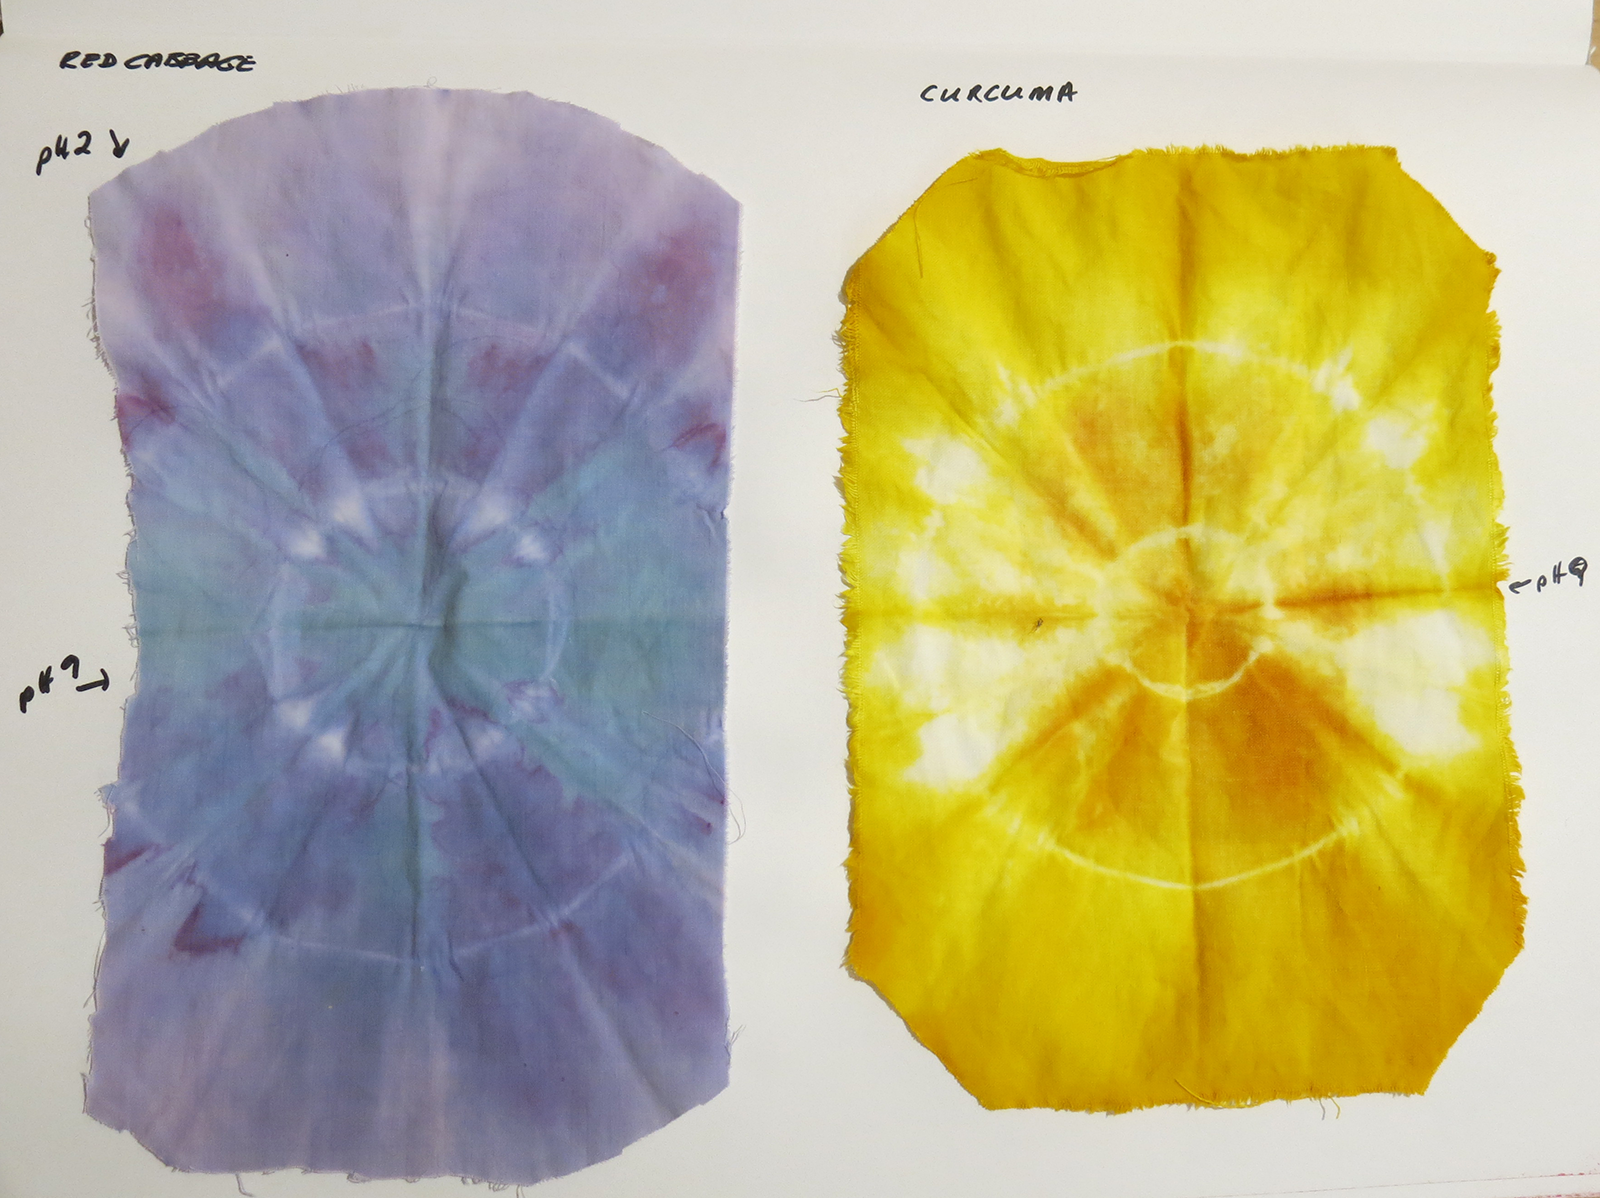 Thin cotton tie-dye with cabbage and curcuma, center dipped in pH 9 and ends in pH 2